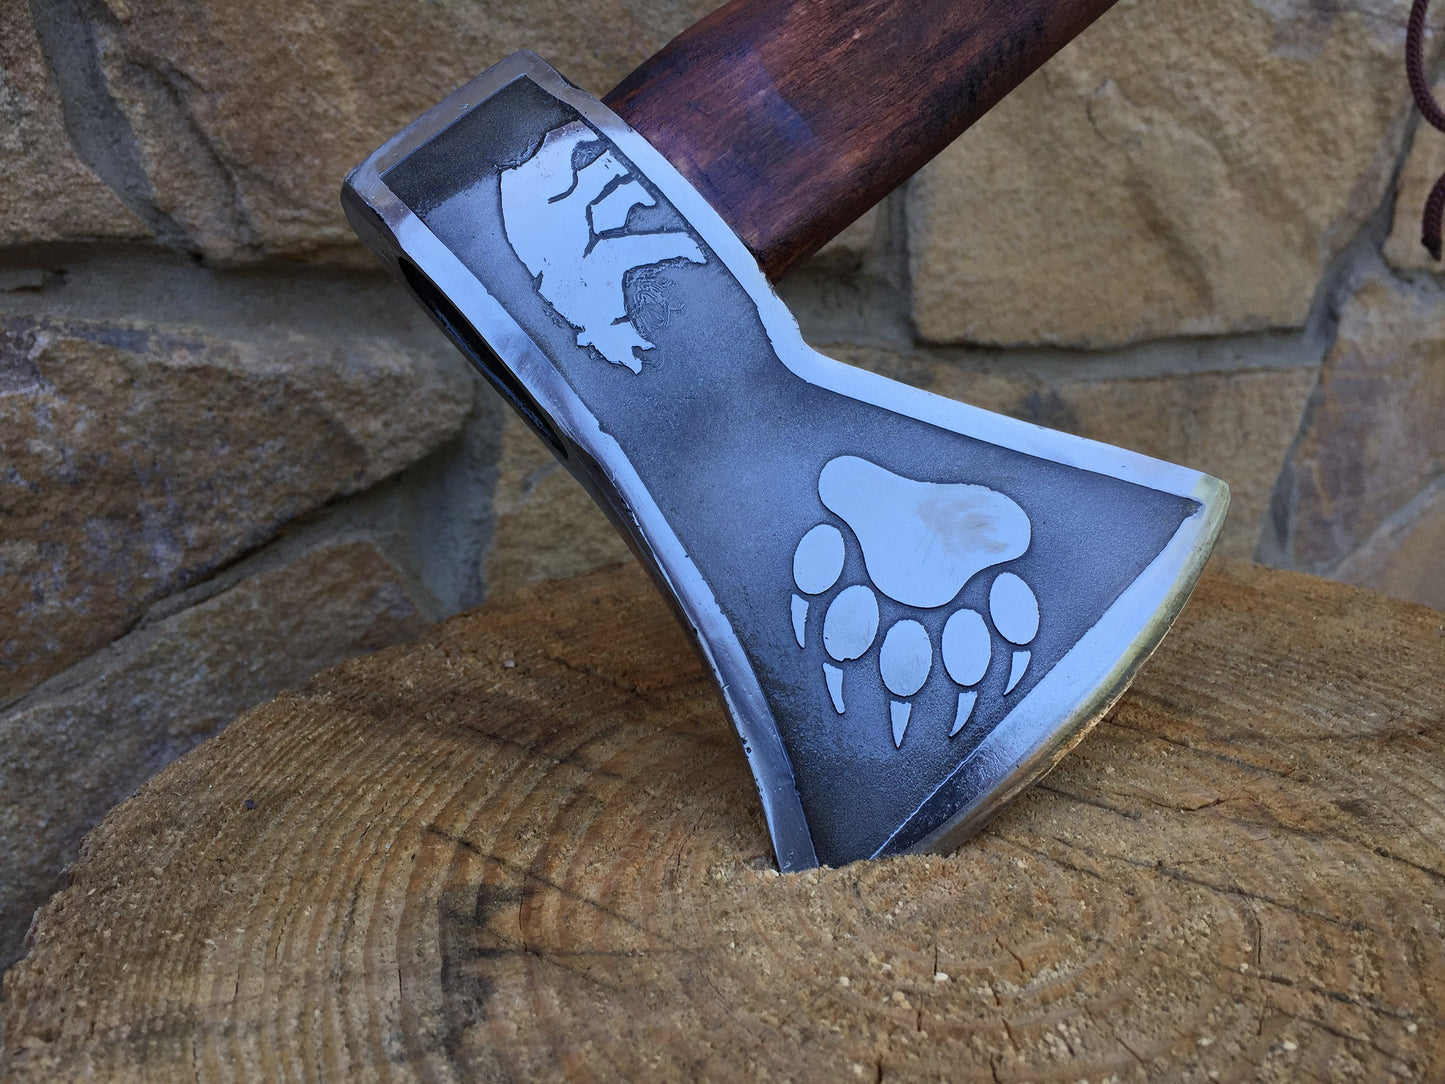 Viking axe, mens gifts, medieval axe, tomahawk, hatchet, Middle Ages, gift for boyfriend, wow birthday gift, best men gift, graduation gift